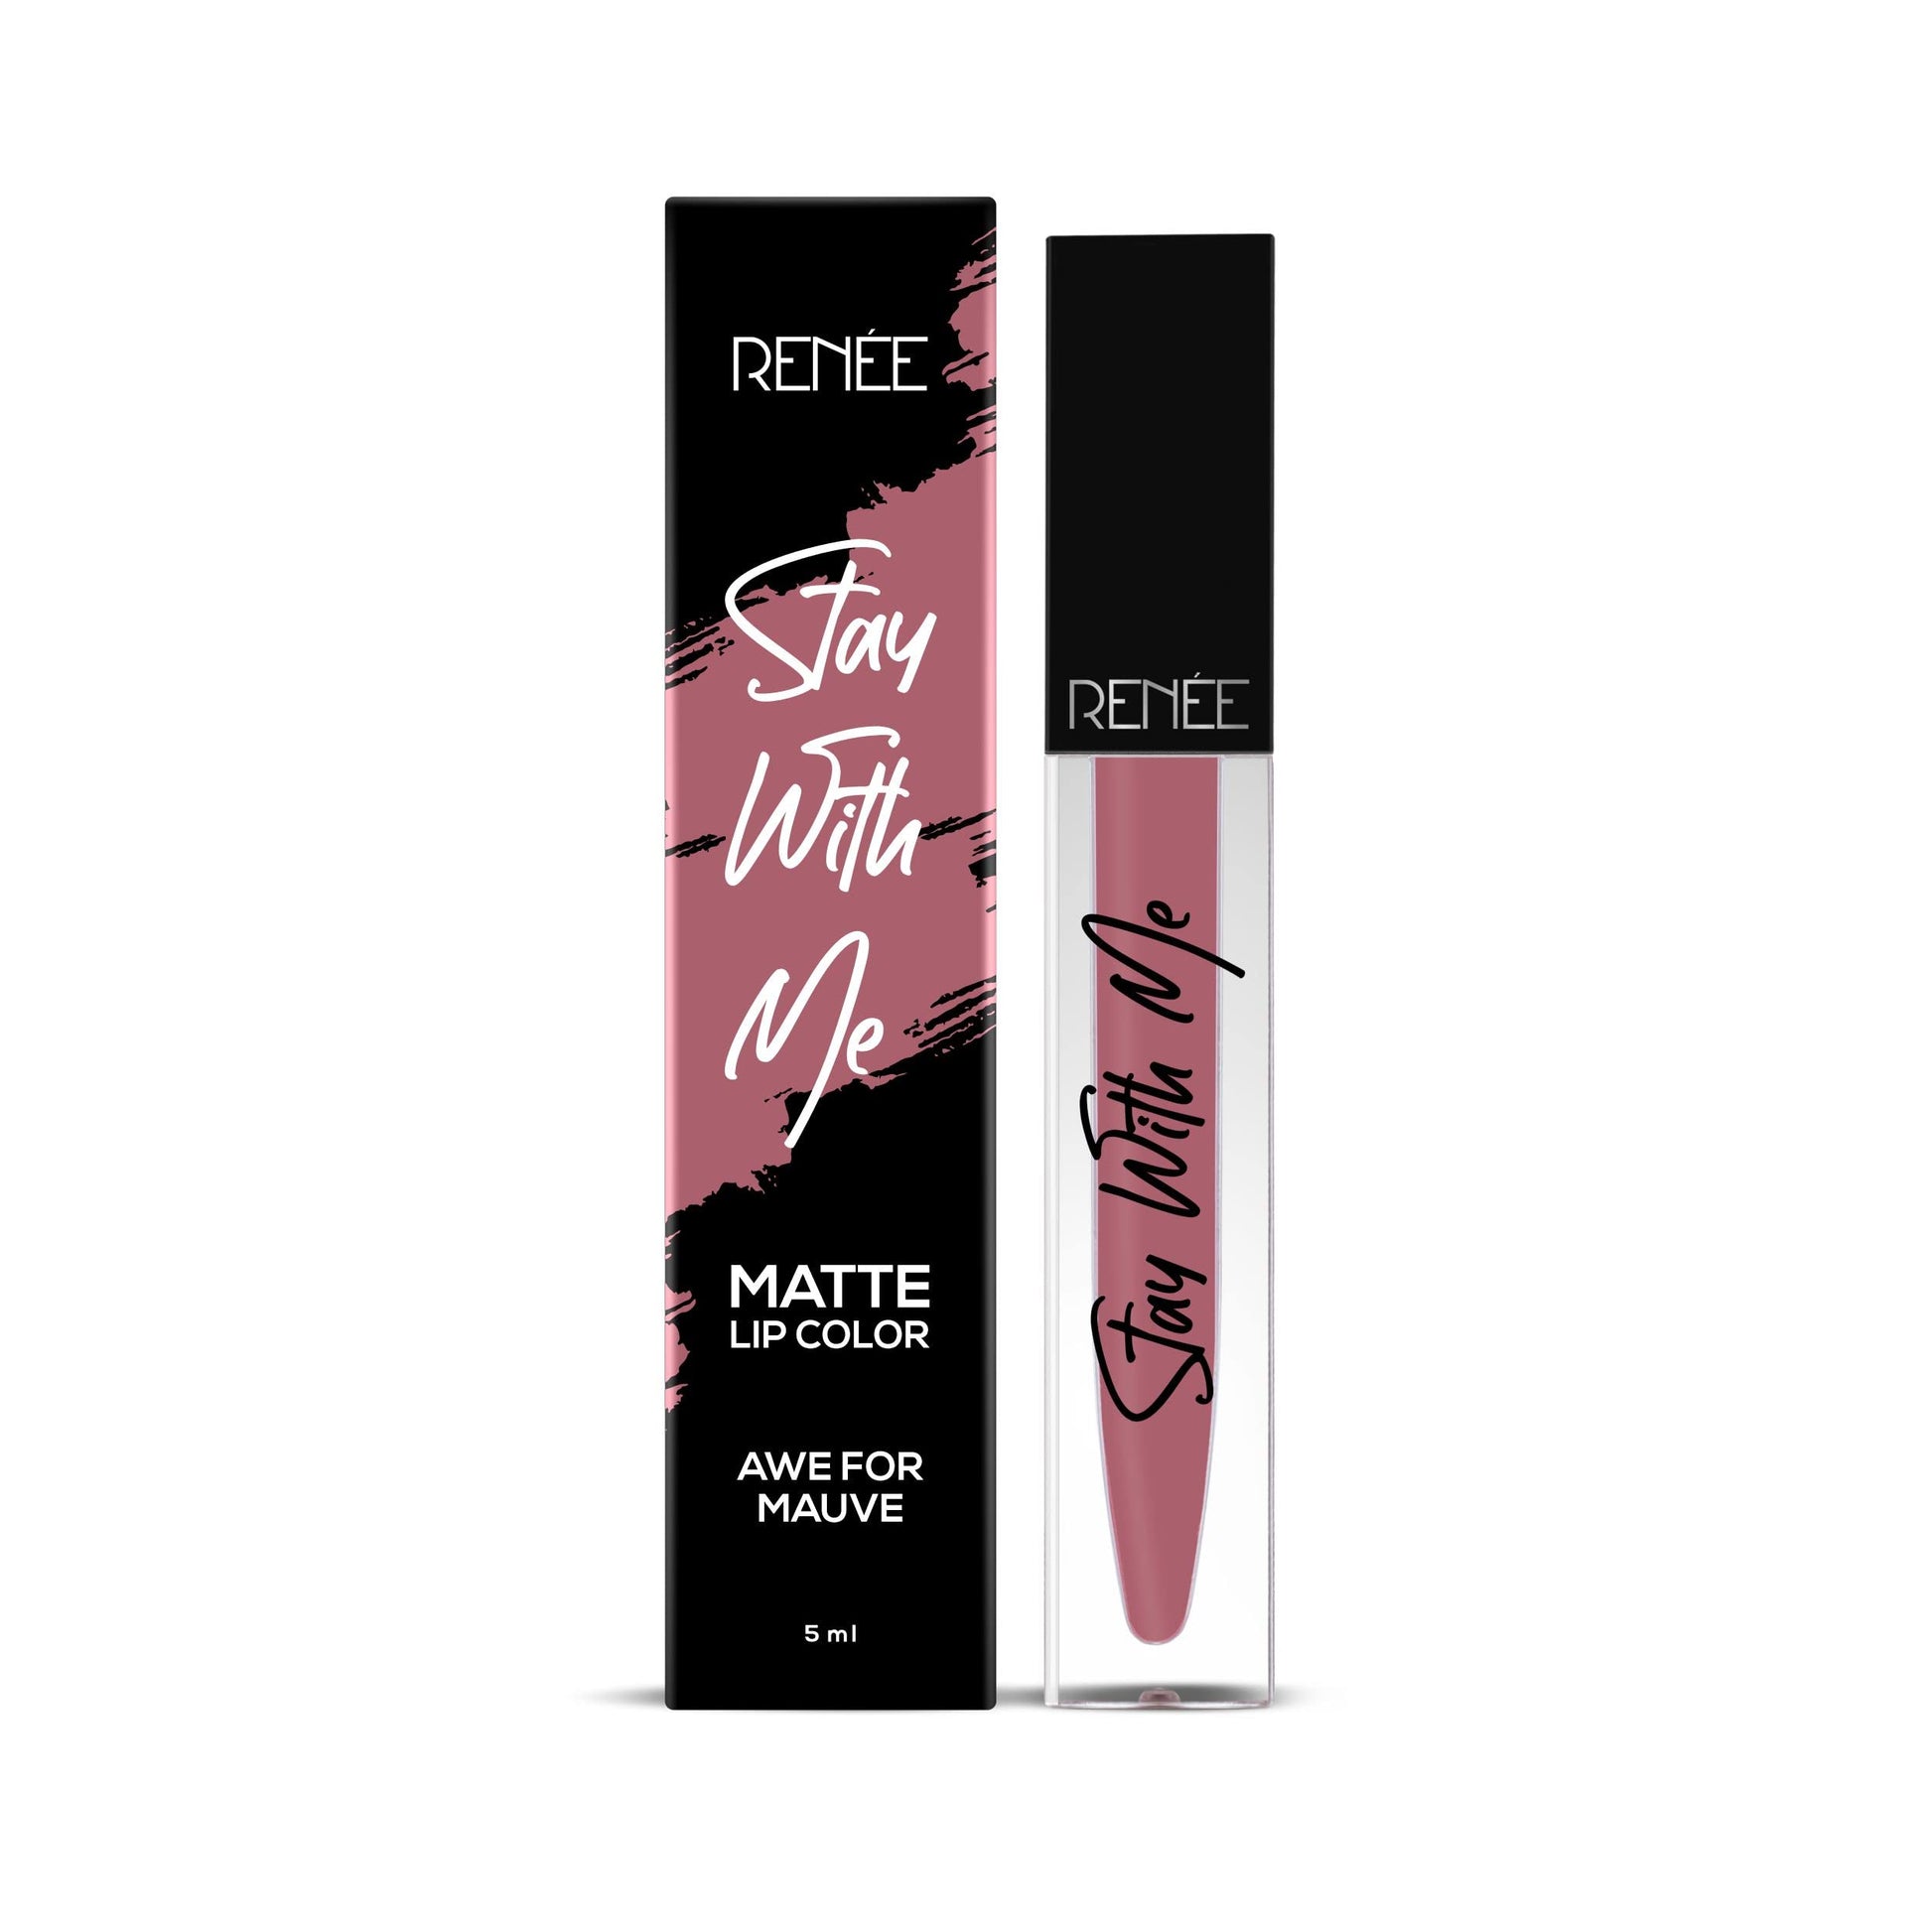 RENEE Stay With Me Matte Lip Color, Long Lasting, Non Transfer, Water & Smudge Proof, Light Weight Liquid Lipstick, Awe for Mauve, 5ml  from RENEE